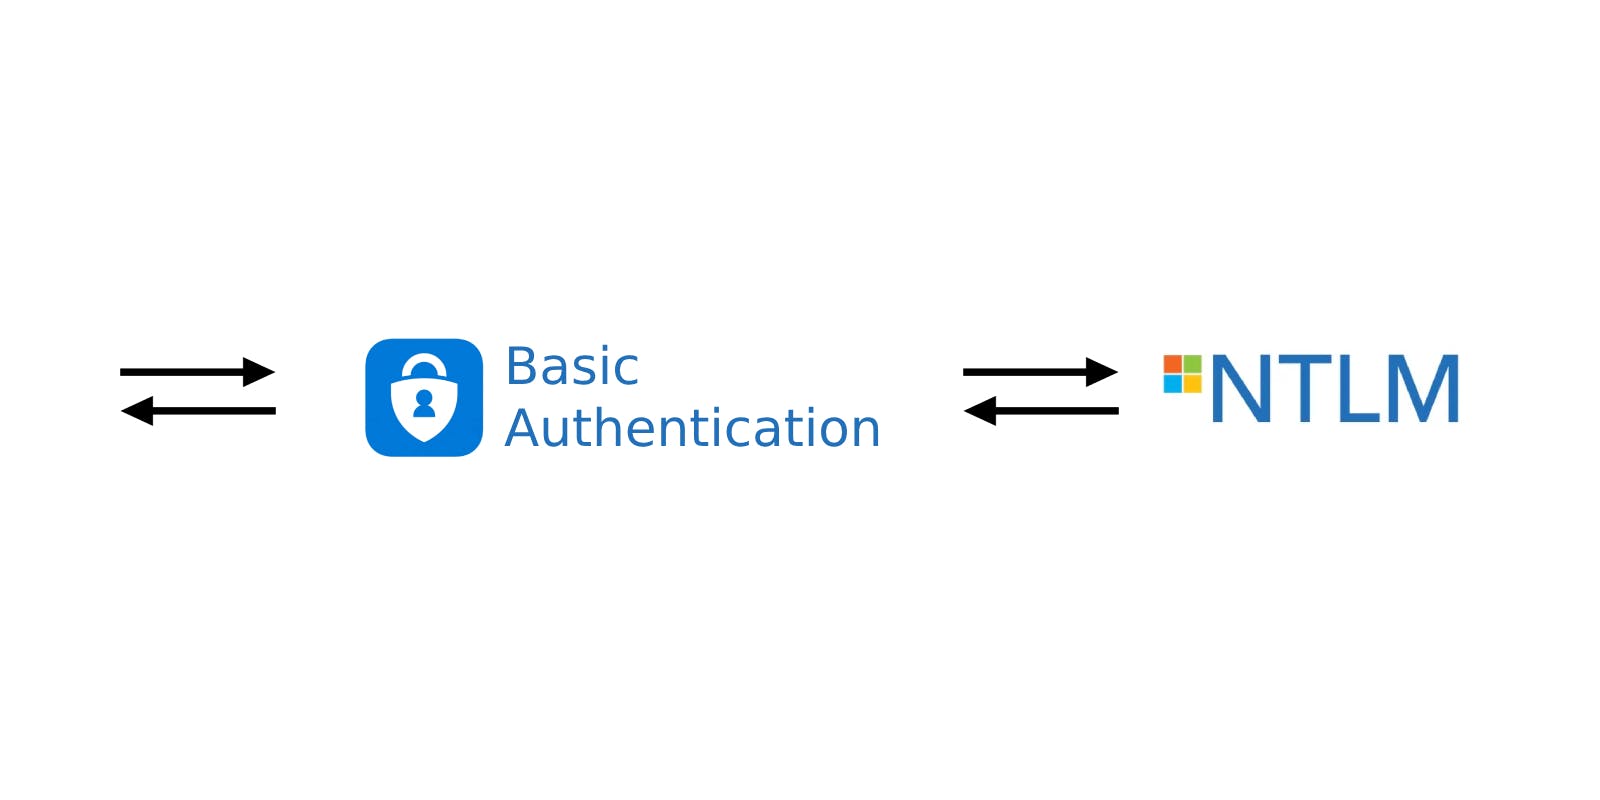 How to Replace NTLM With Basic Authentication With a Proxy